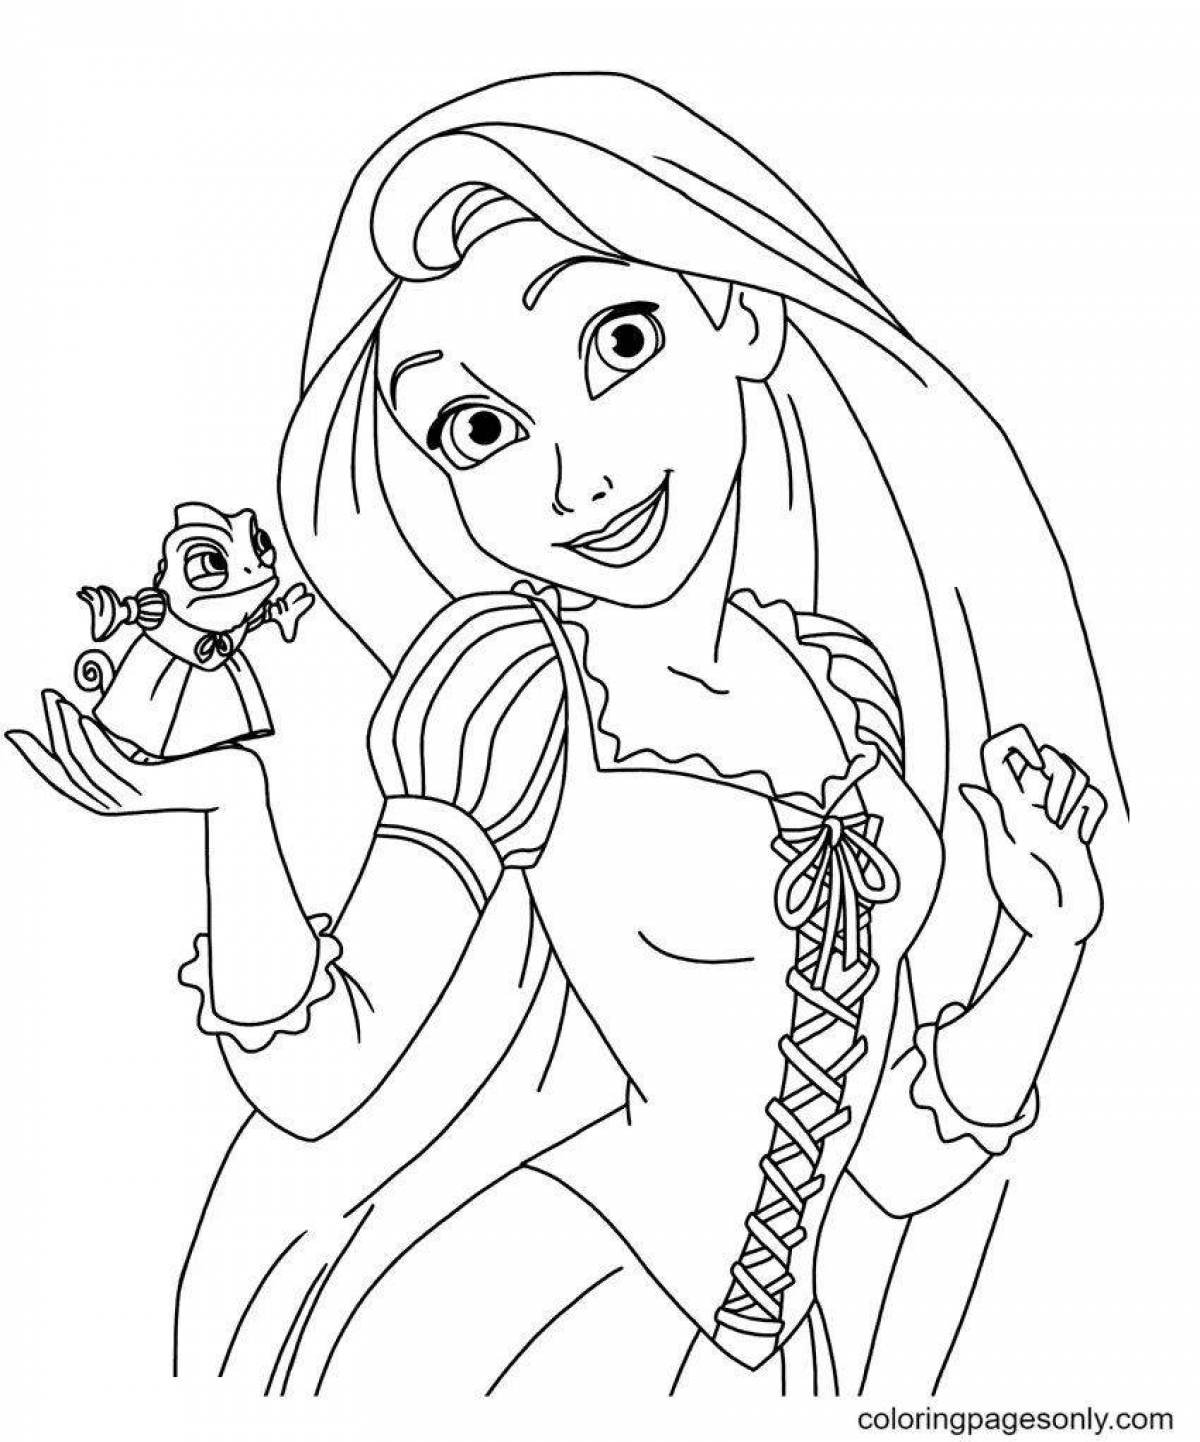 Rapunzel for children 5 6 years old #2